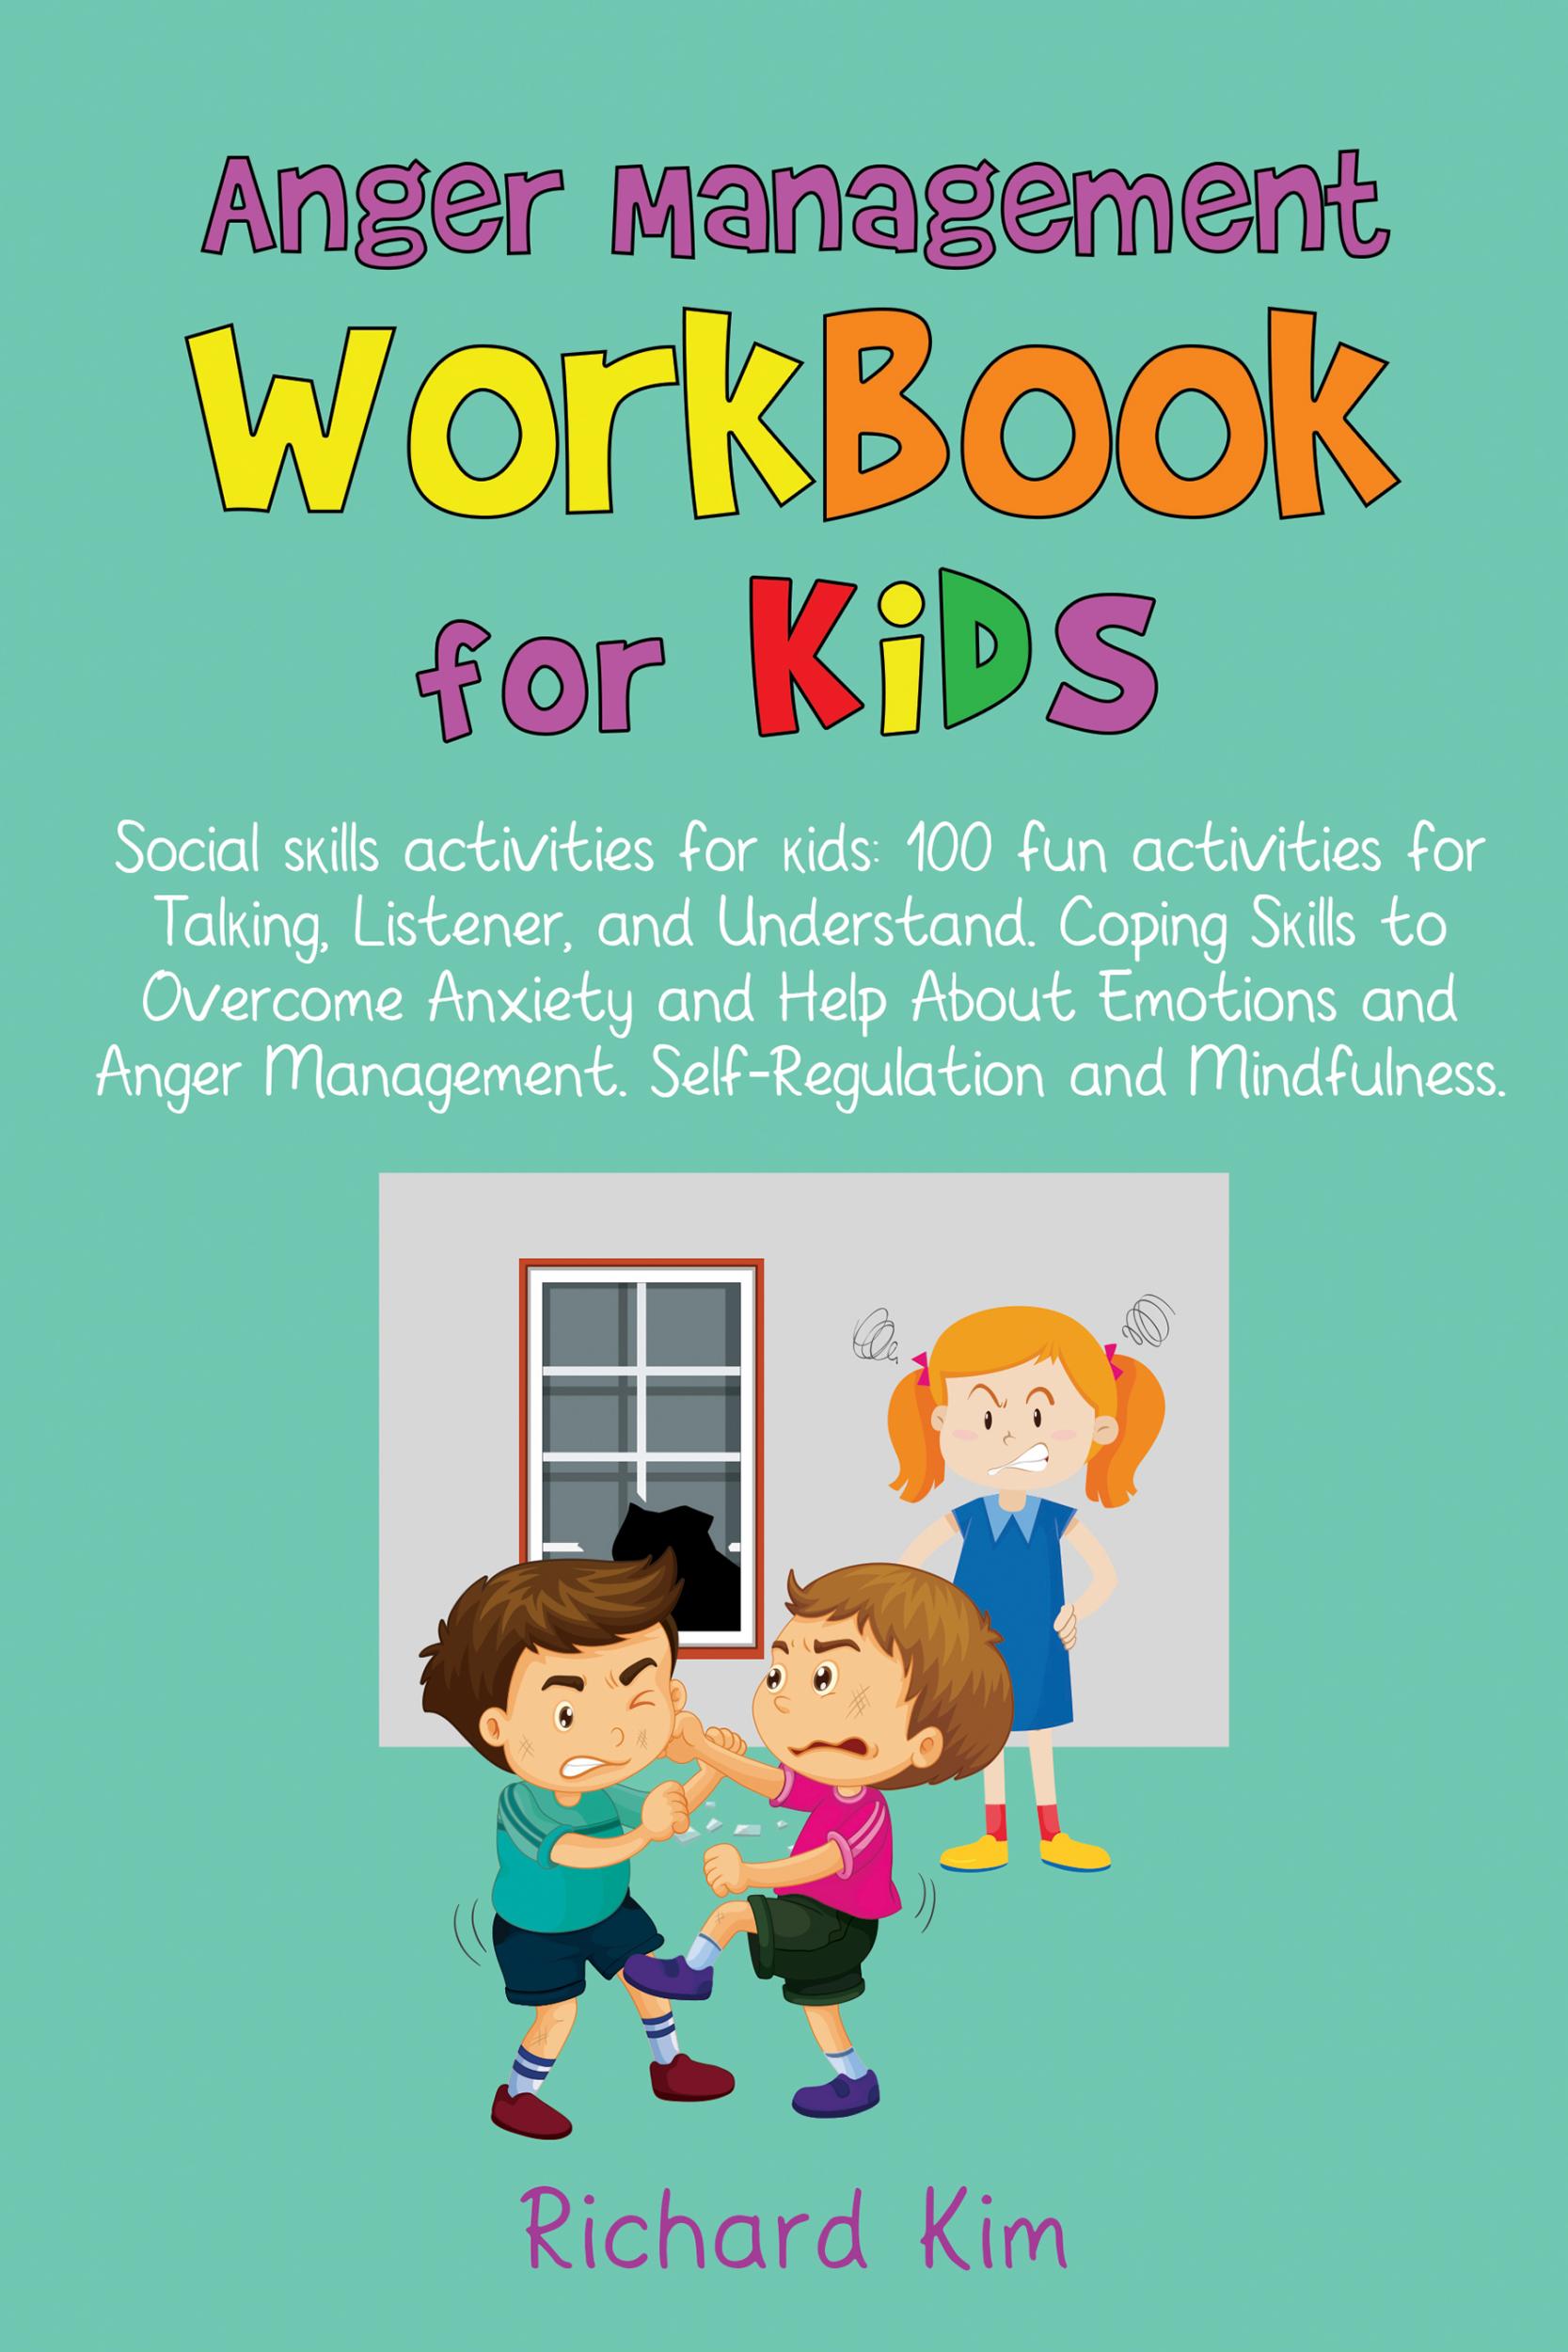 Get your free copy of Anger Management Workbook for Kids ...